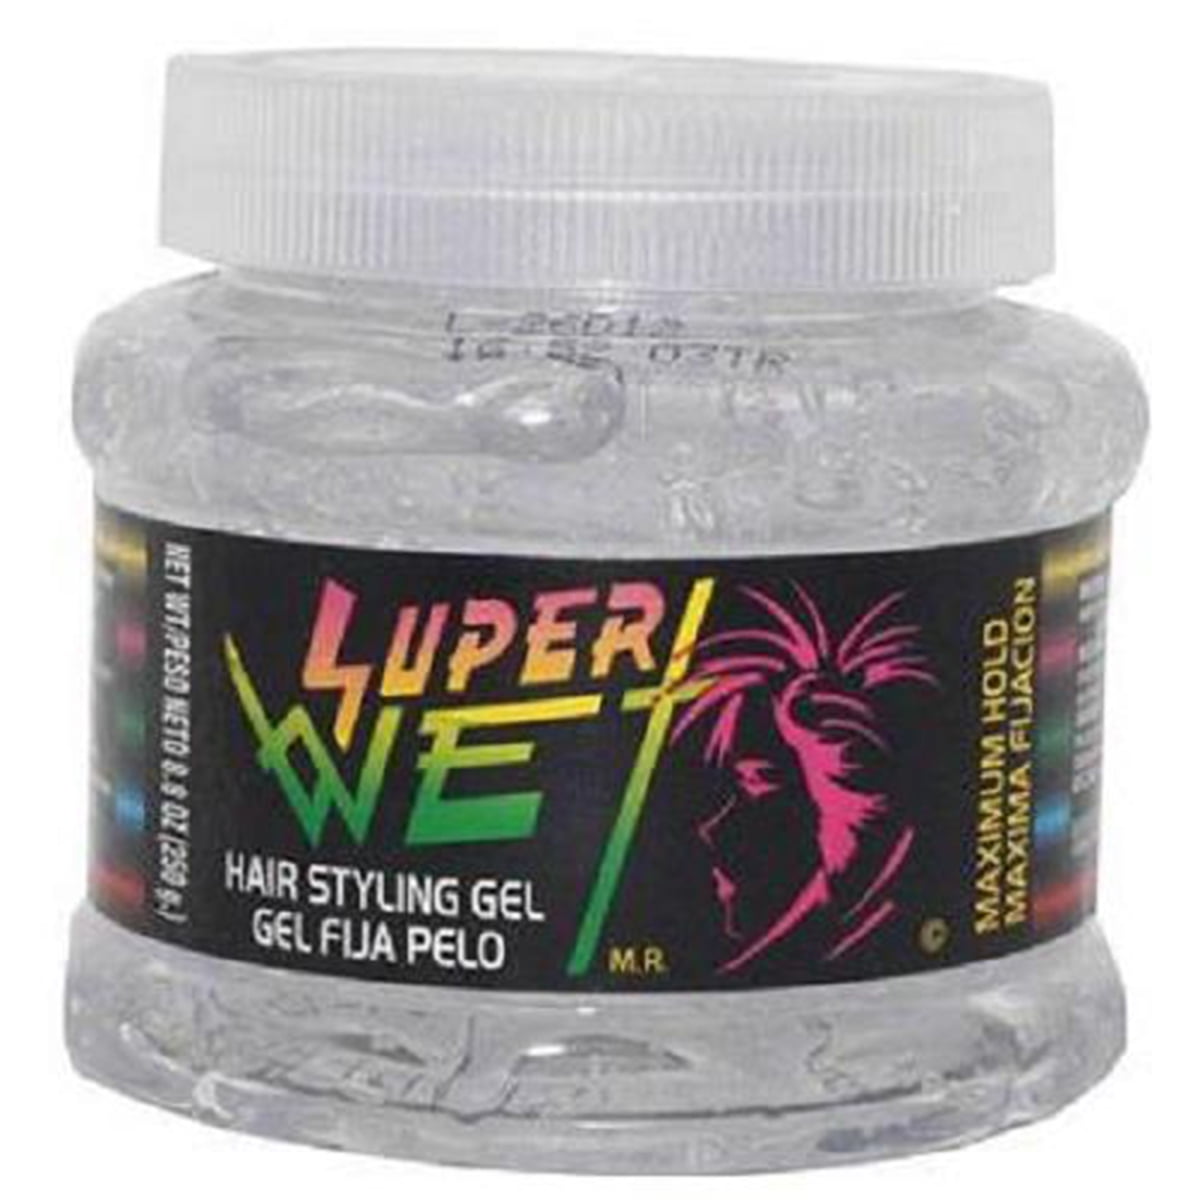 Buy Product Of Super Wet, Hair Styling Gel - Maximum Hold Clear, Count 1 -  Hair Care Products Grab Varieties & Flavors Online at Lowest Price in Ubuy  Mexico. 688577427